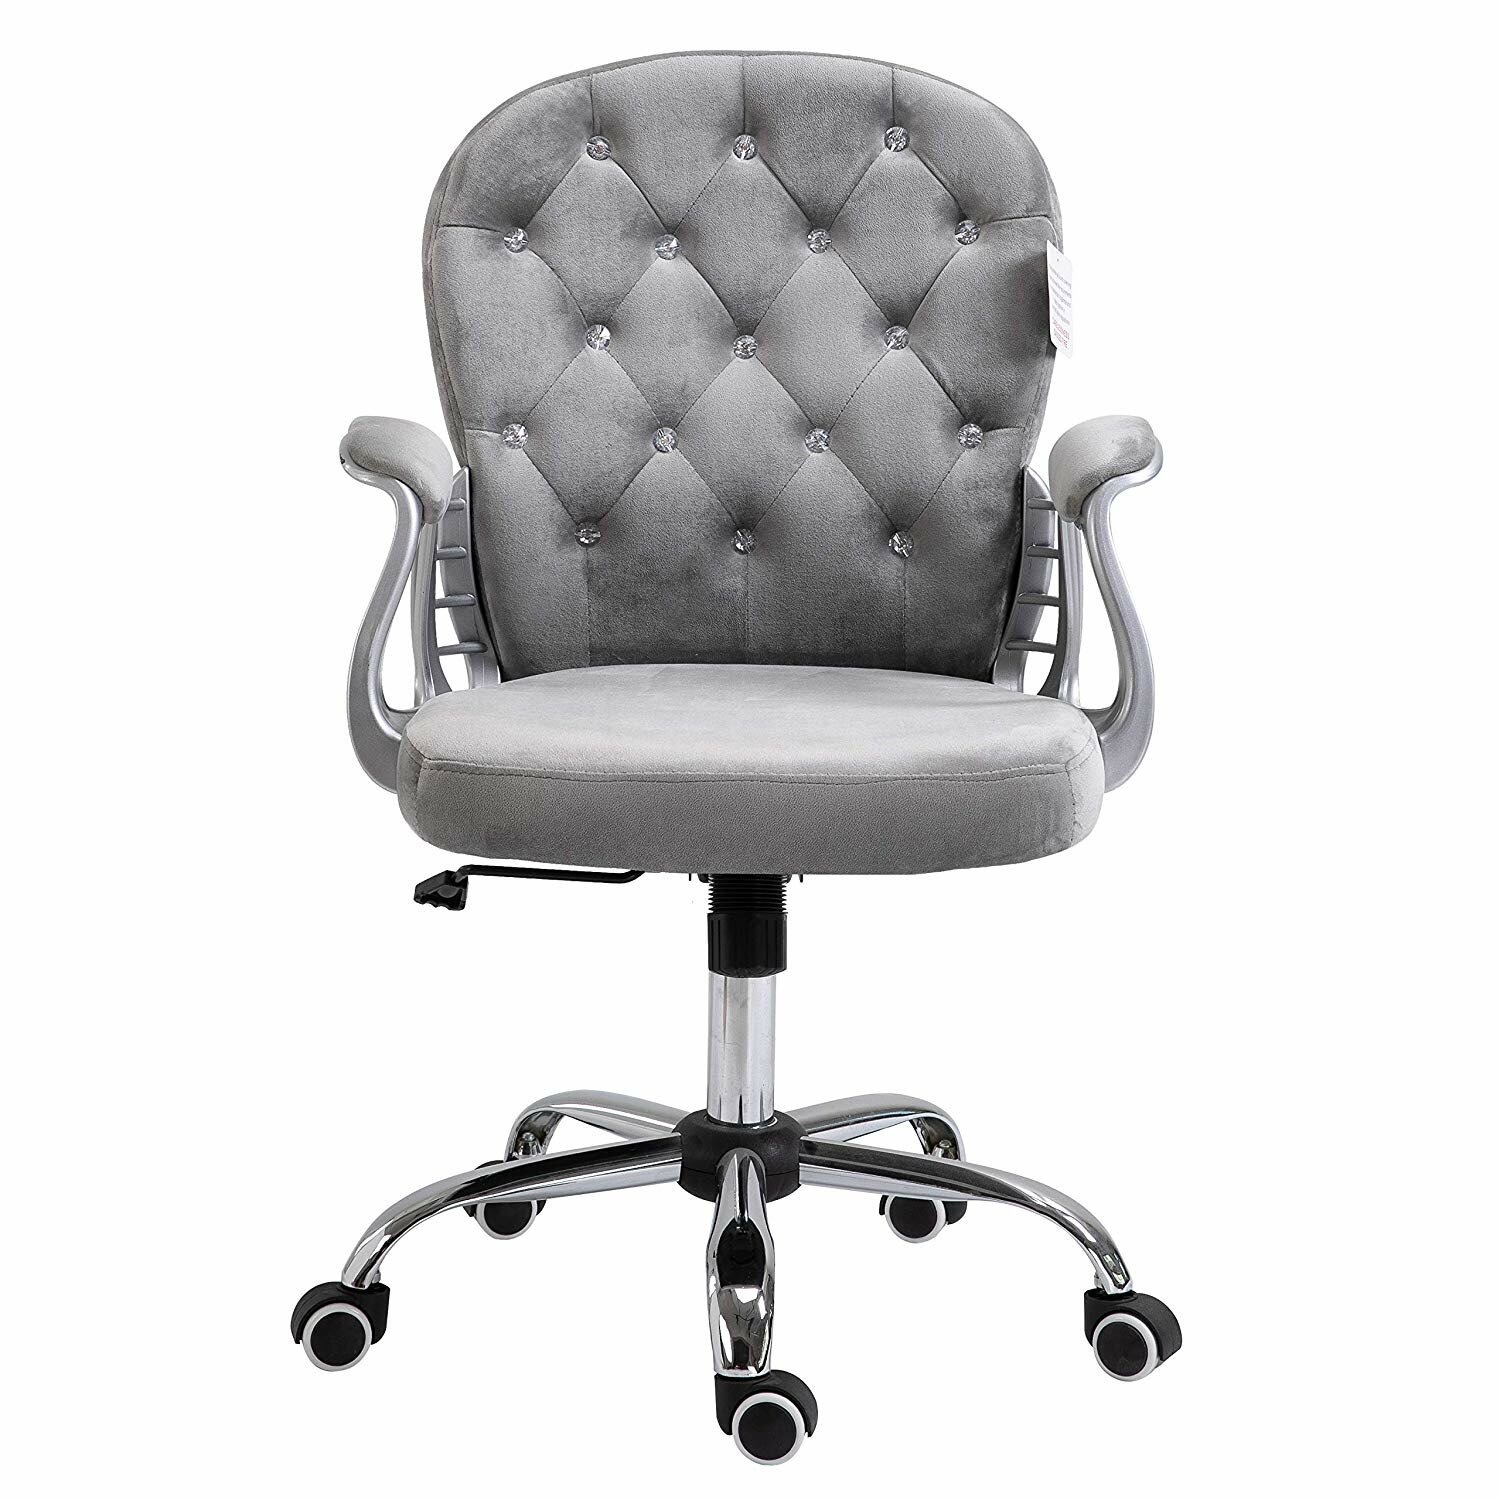 JL Comfurni Office Chair Faux Leather Armchair Swivel Adjustable Chair Home Office Computer Girl Desk Chairs Cream White 